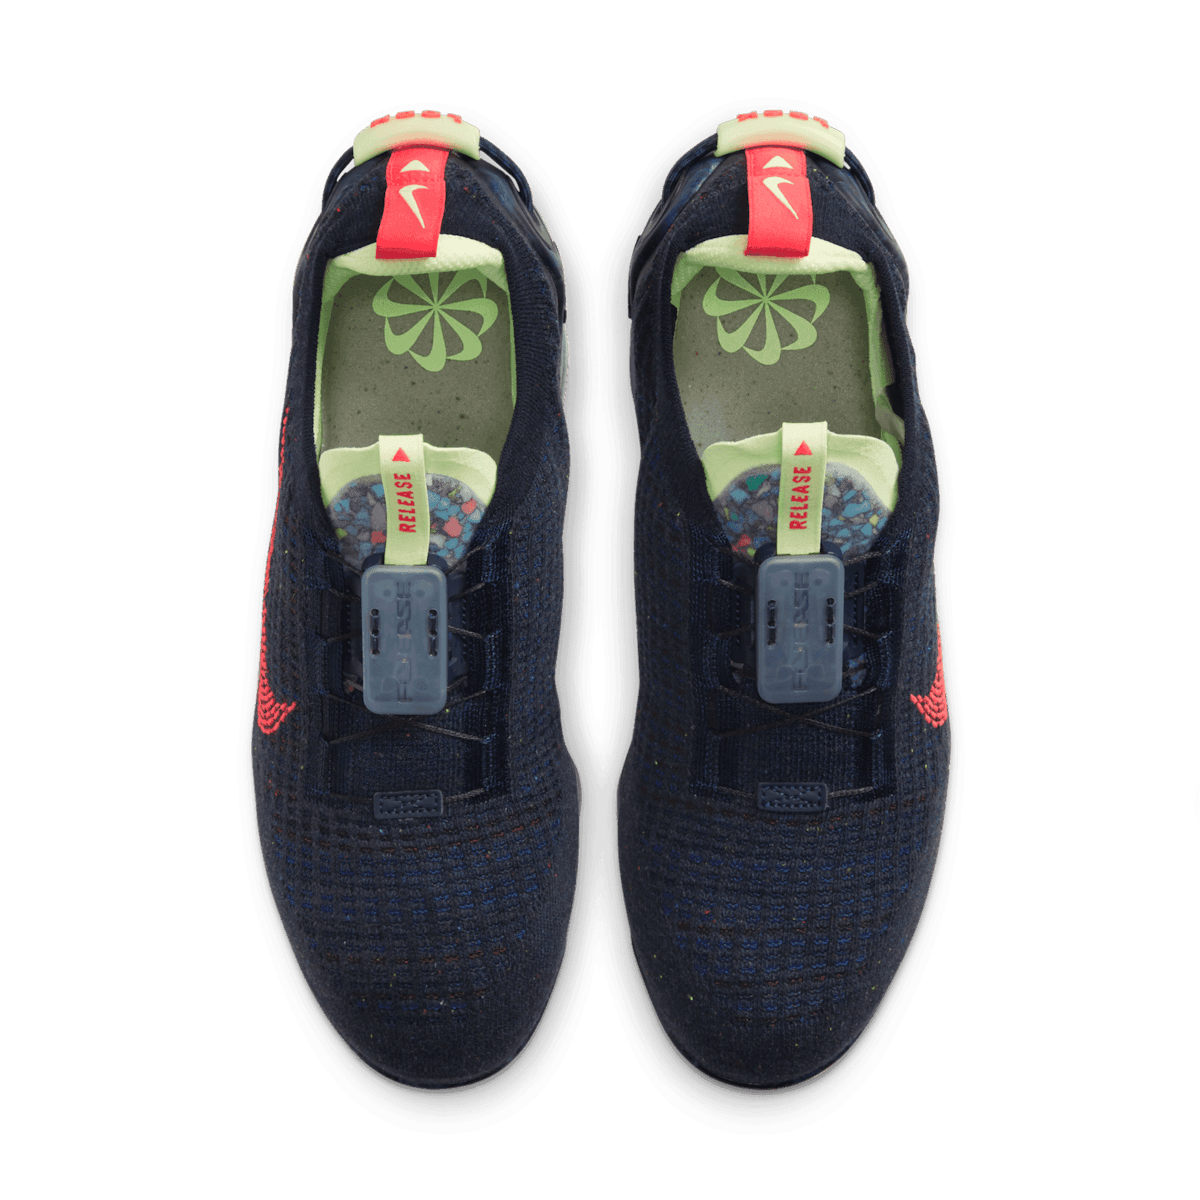 Nike Air VaporMax 2020 Flyknit 'Obsidian Siren Red' Angle 1